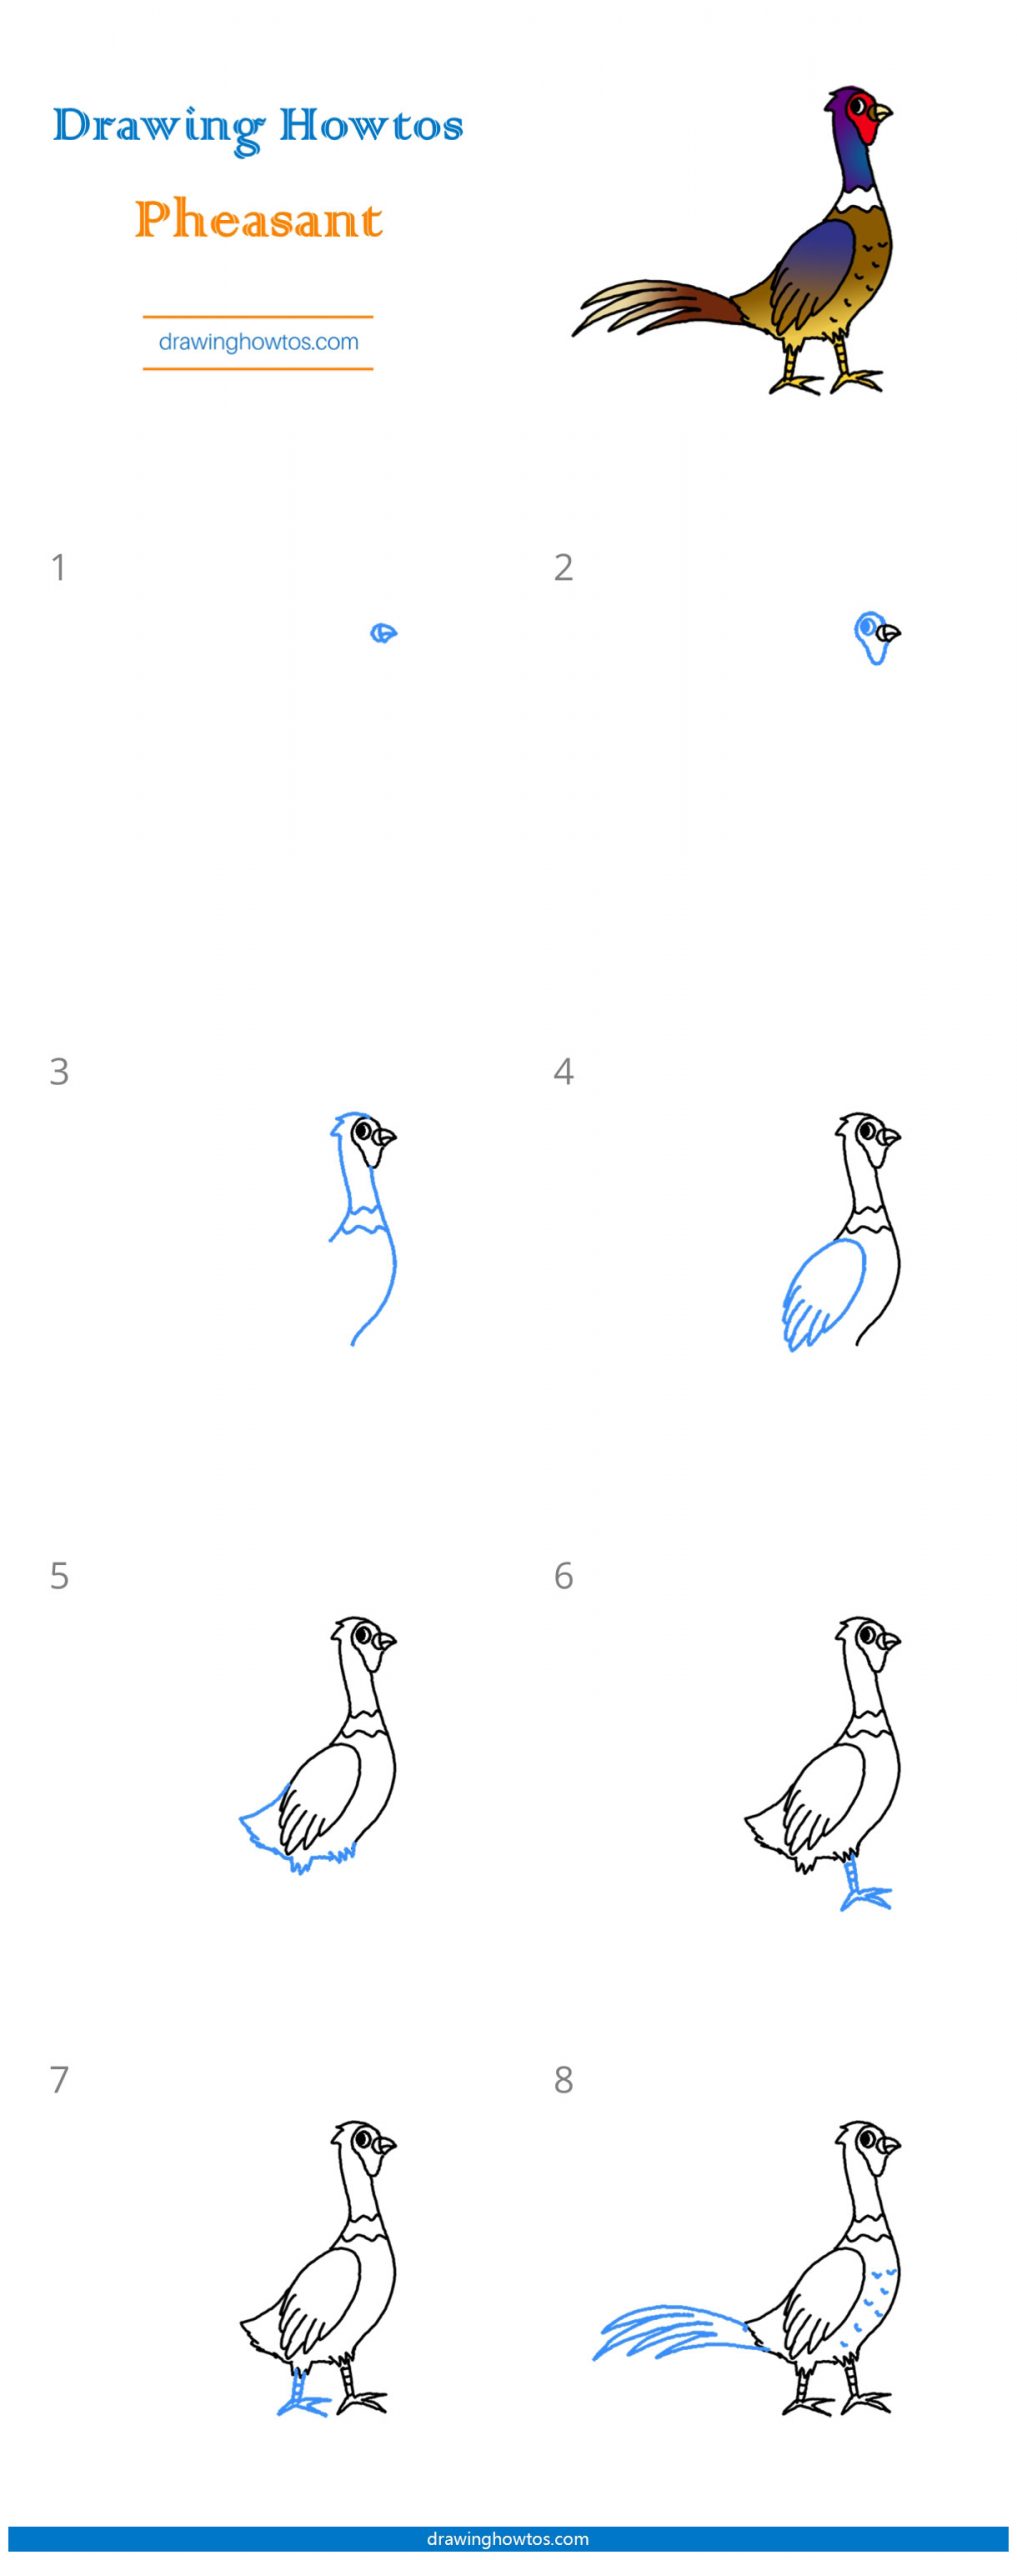 How to Draw a Pheasant Step by Step